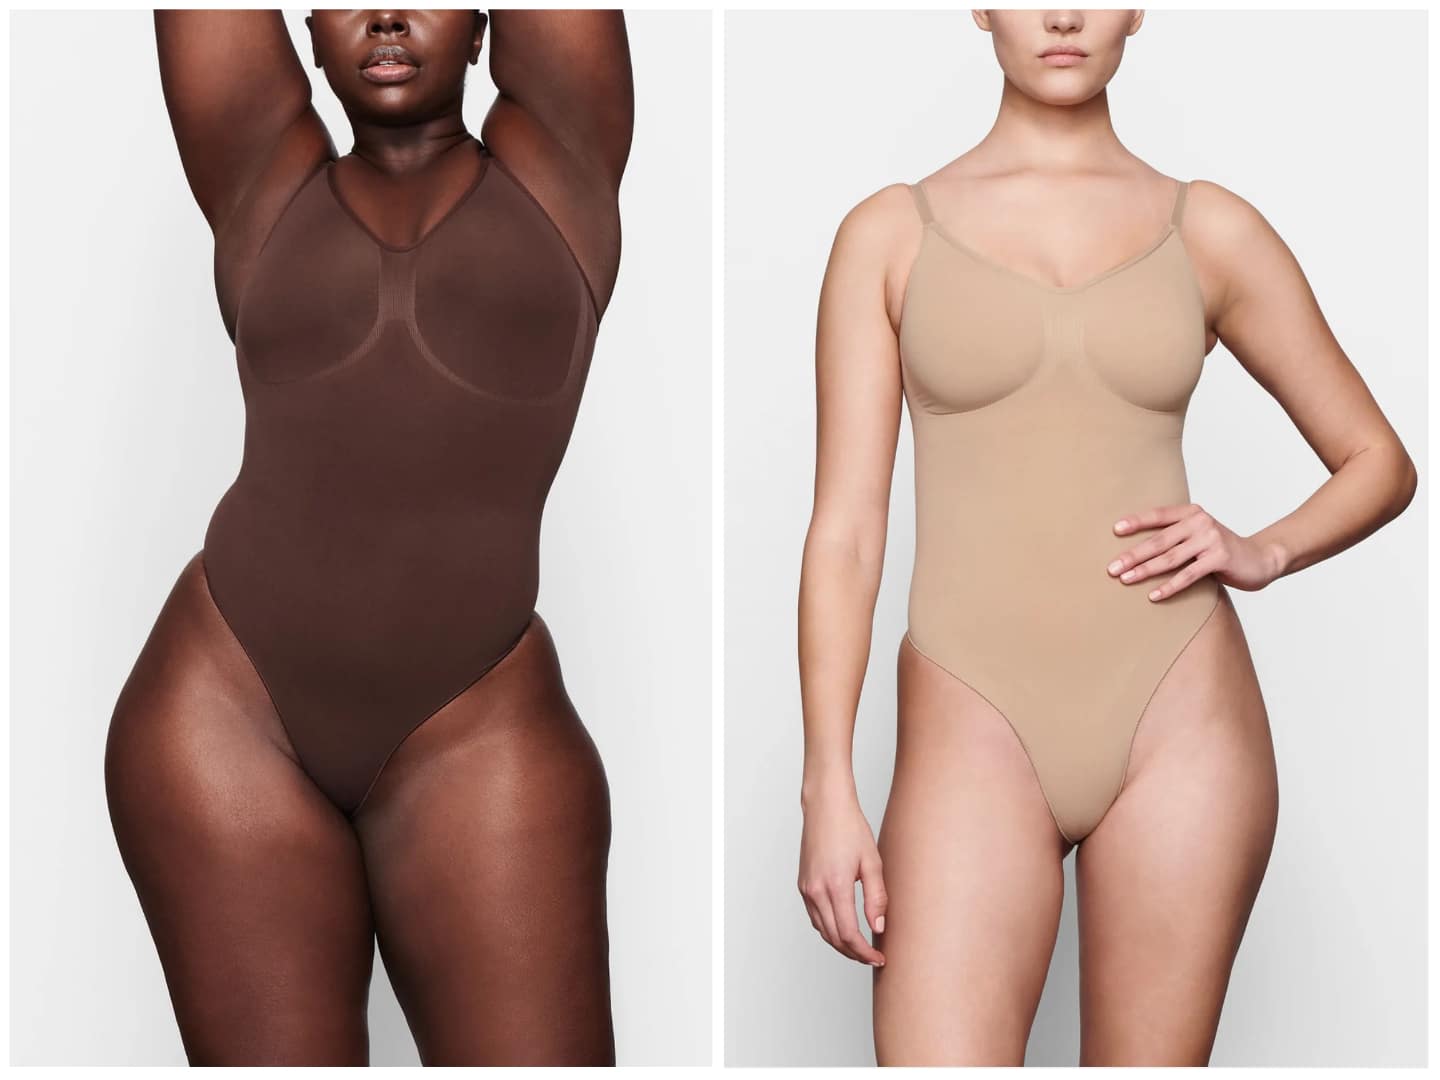 The brand is widening the vagina area of the bodysuit. (Skims)